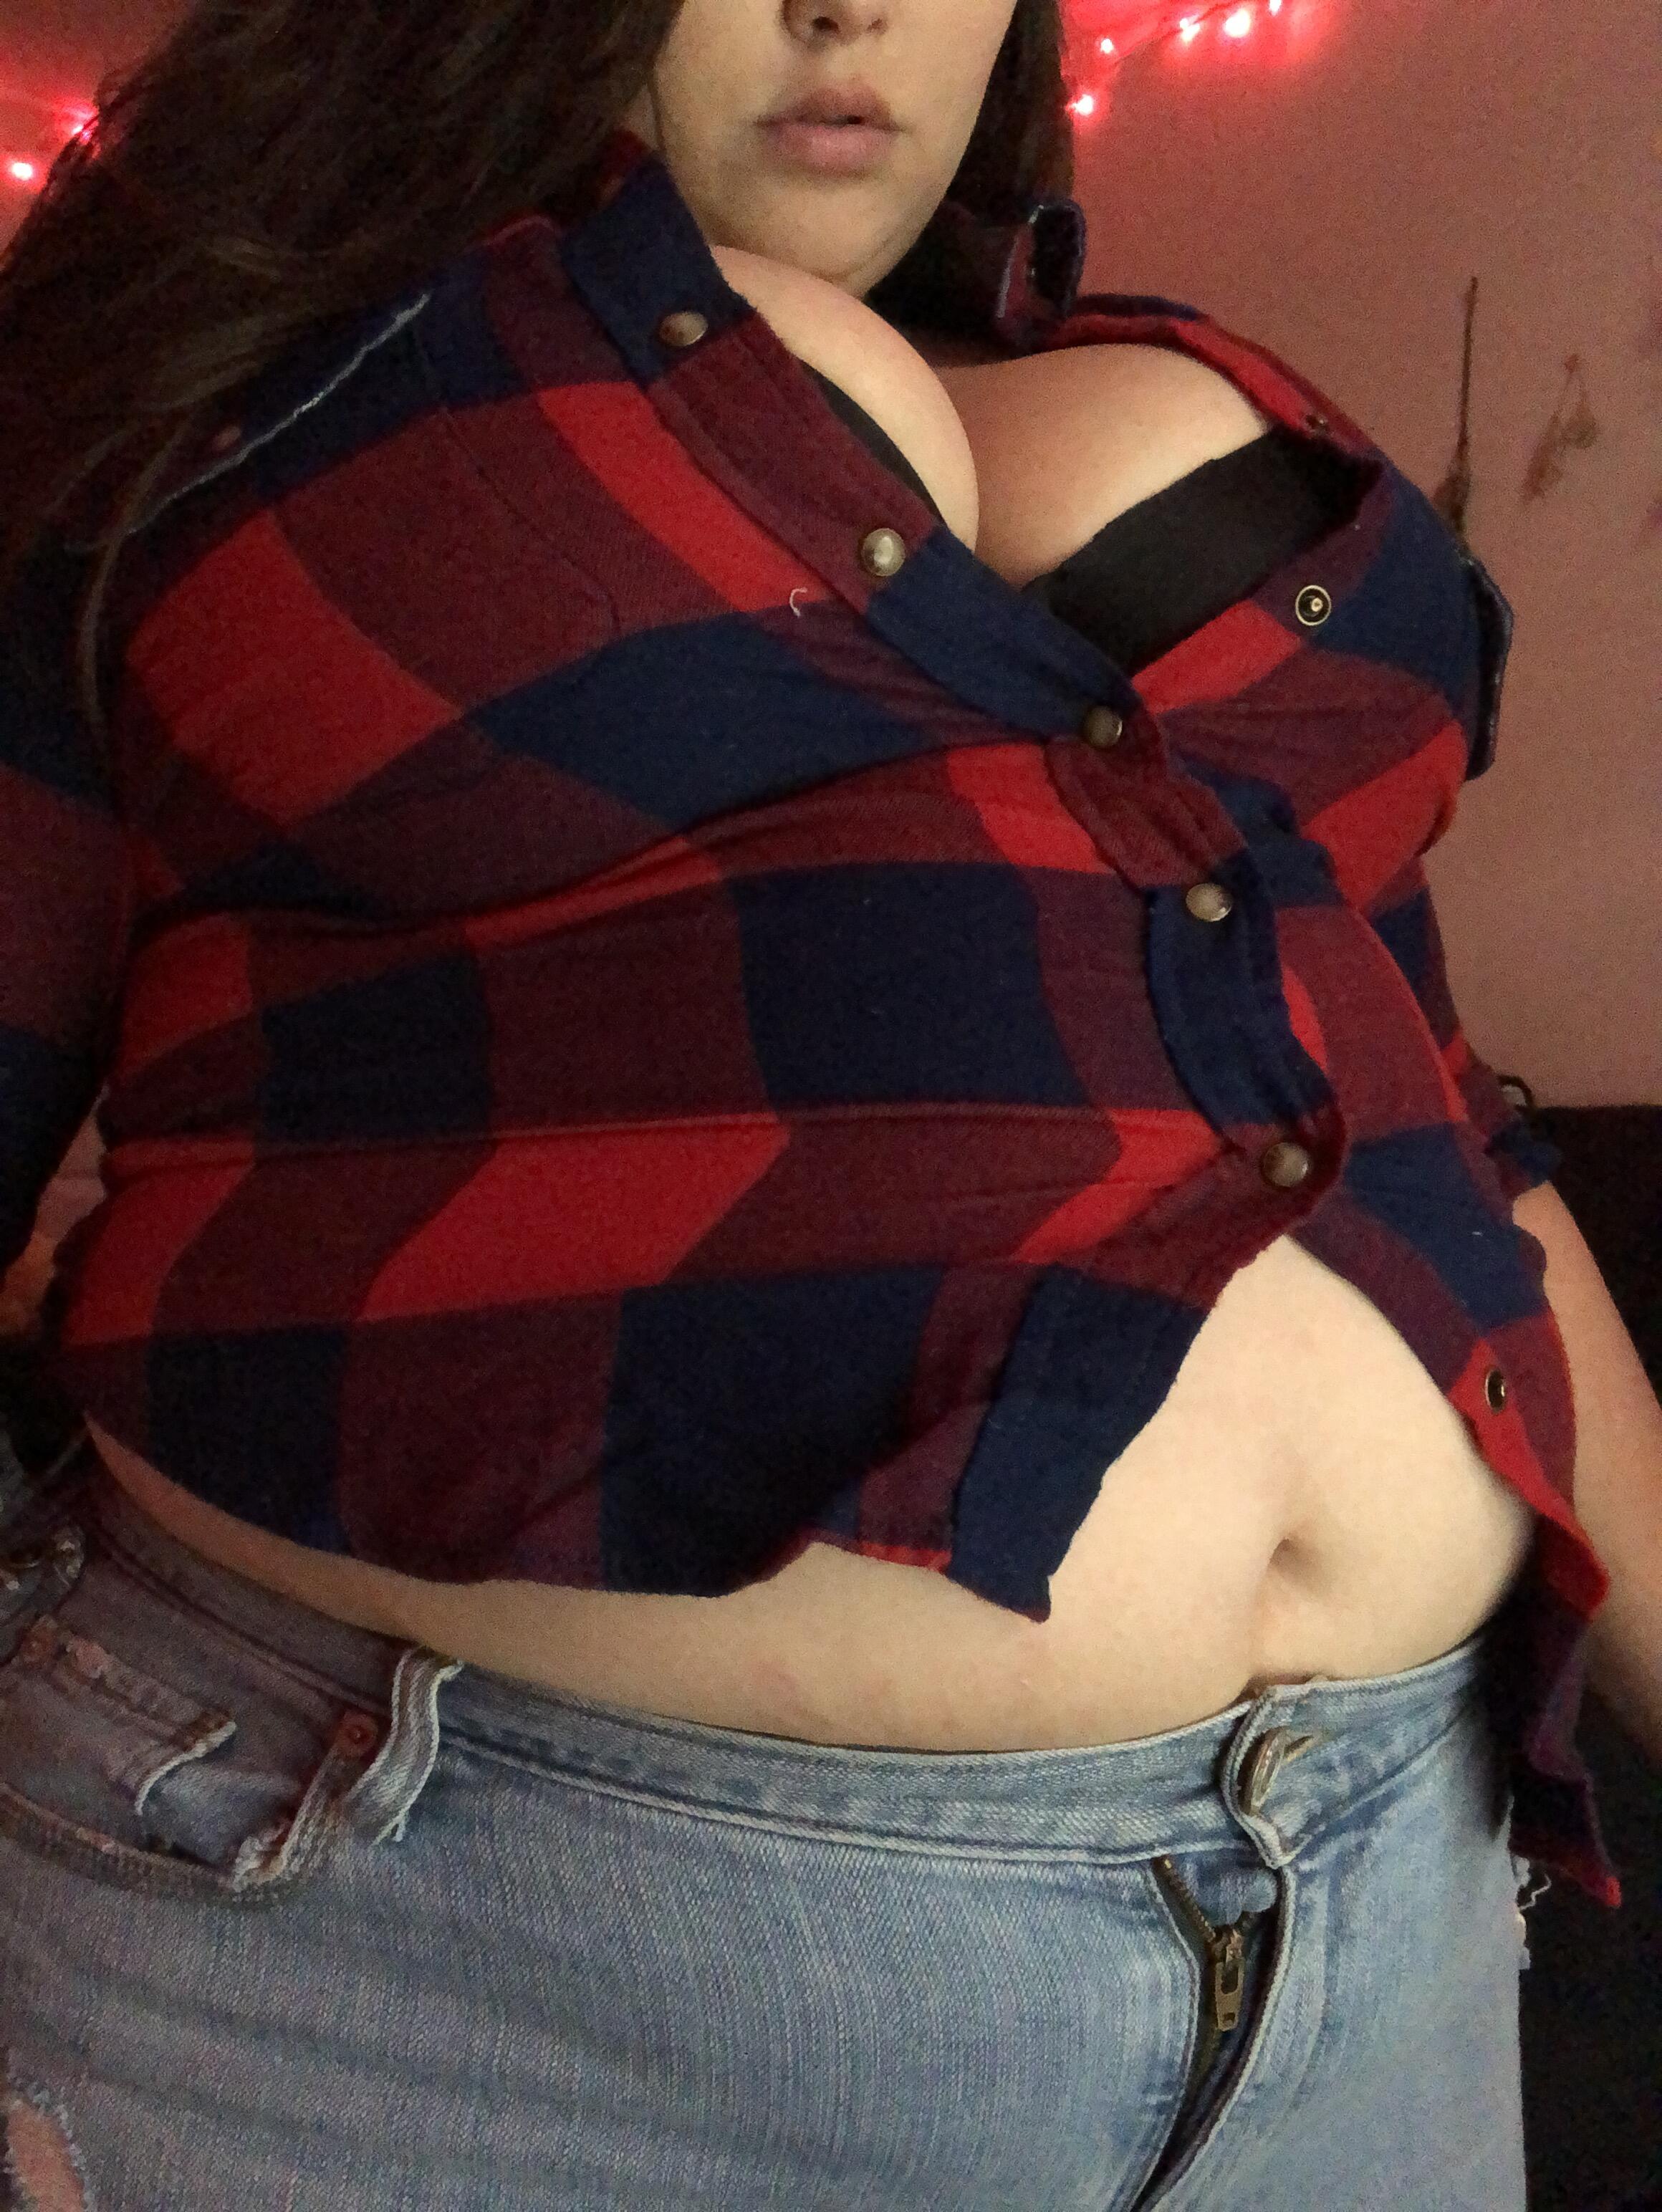 Chubby Girl Belly Stuffing